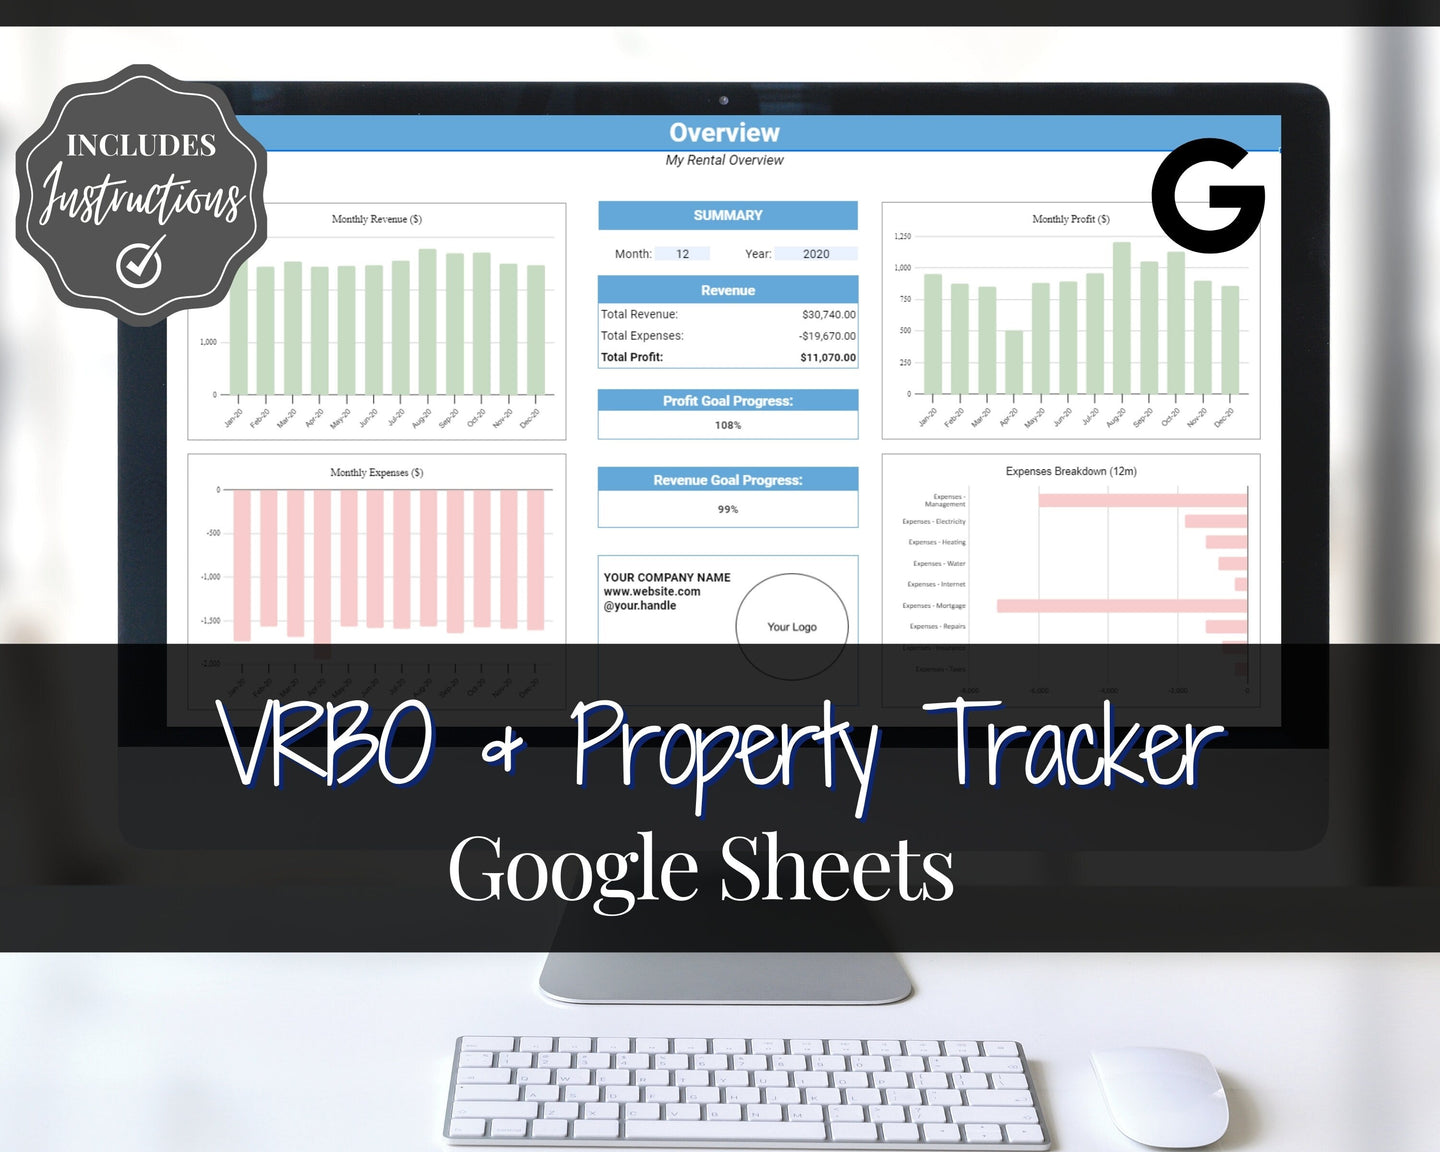 Google Sheets VRBO Spreadsheet Business Tracker, Rental Vacation Property, Editable Monthly Annual Profit Loss, Real Estate Income Expense, Super Host